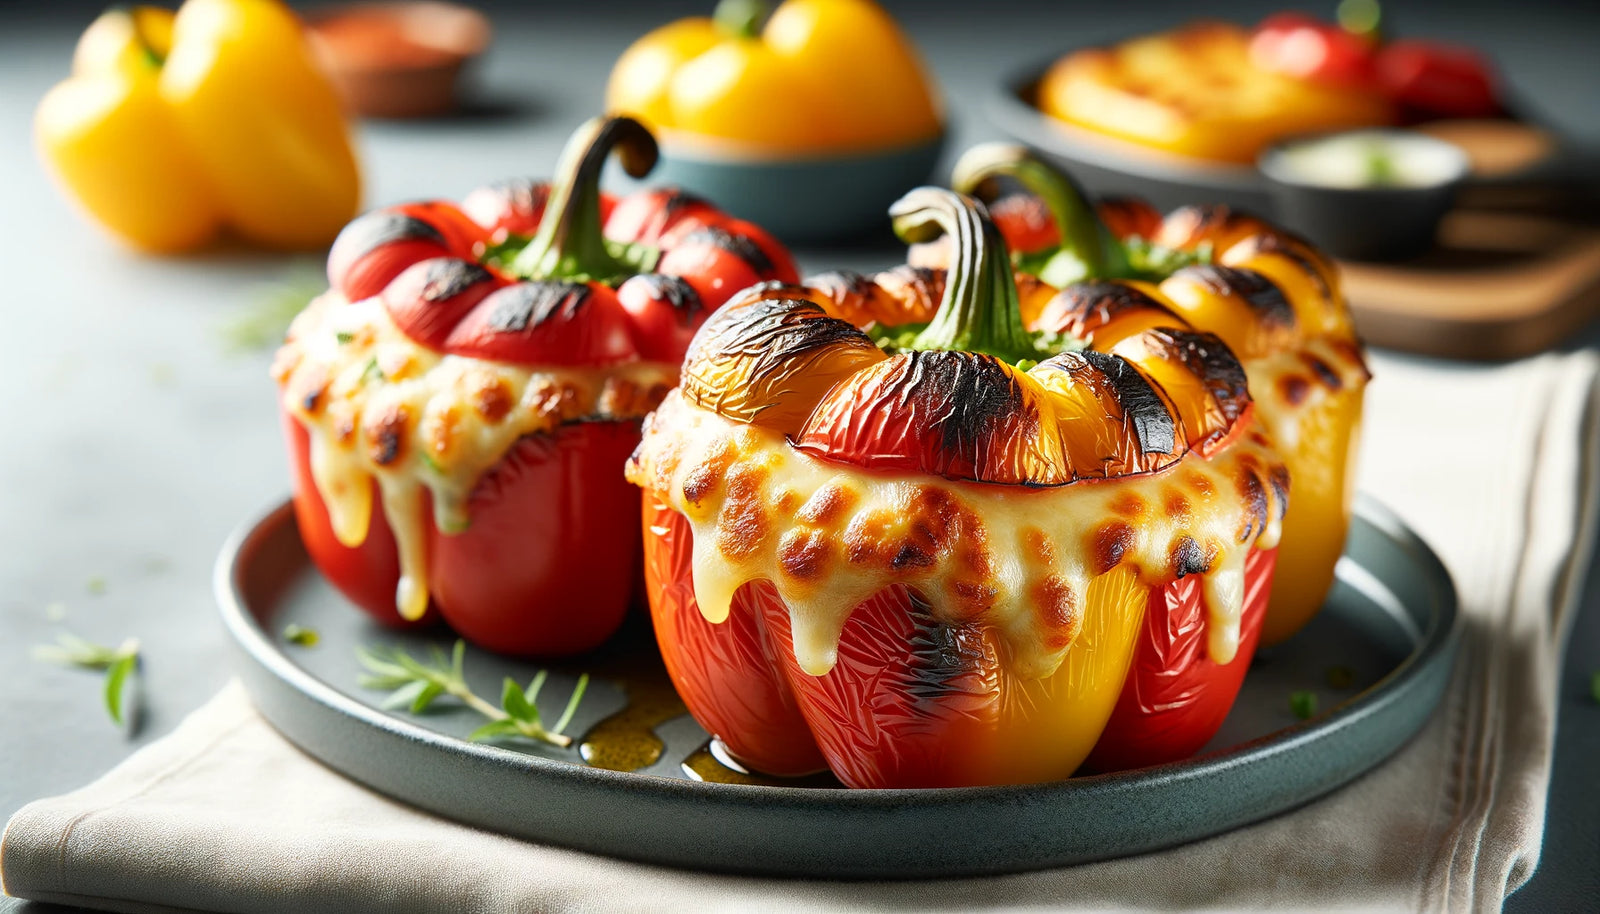 Ultimate Arteflame Grilled Stuffed Peppers